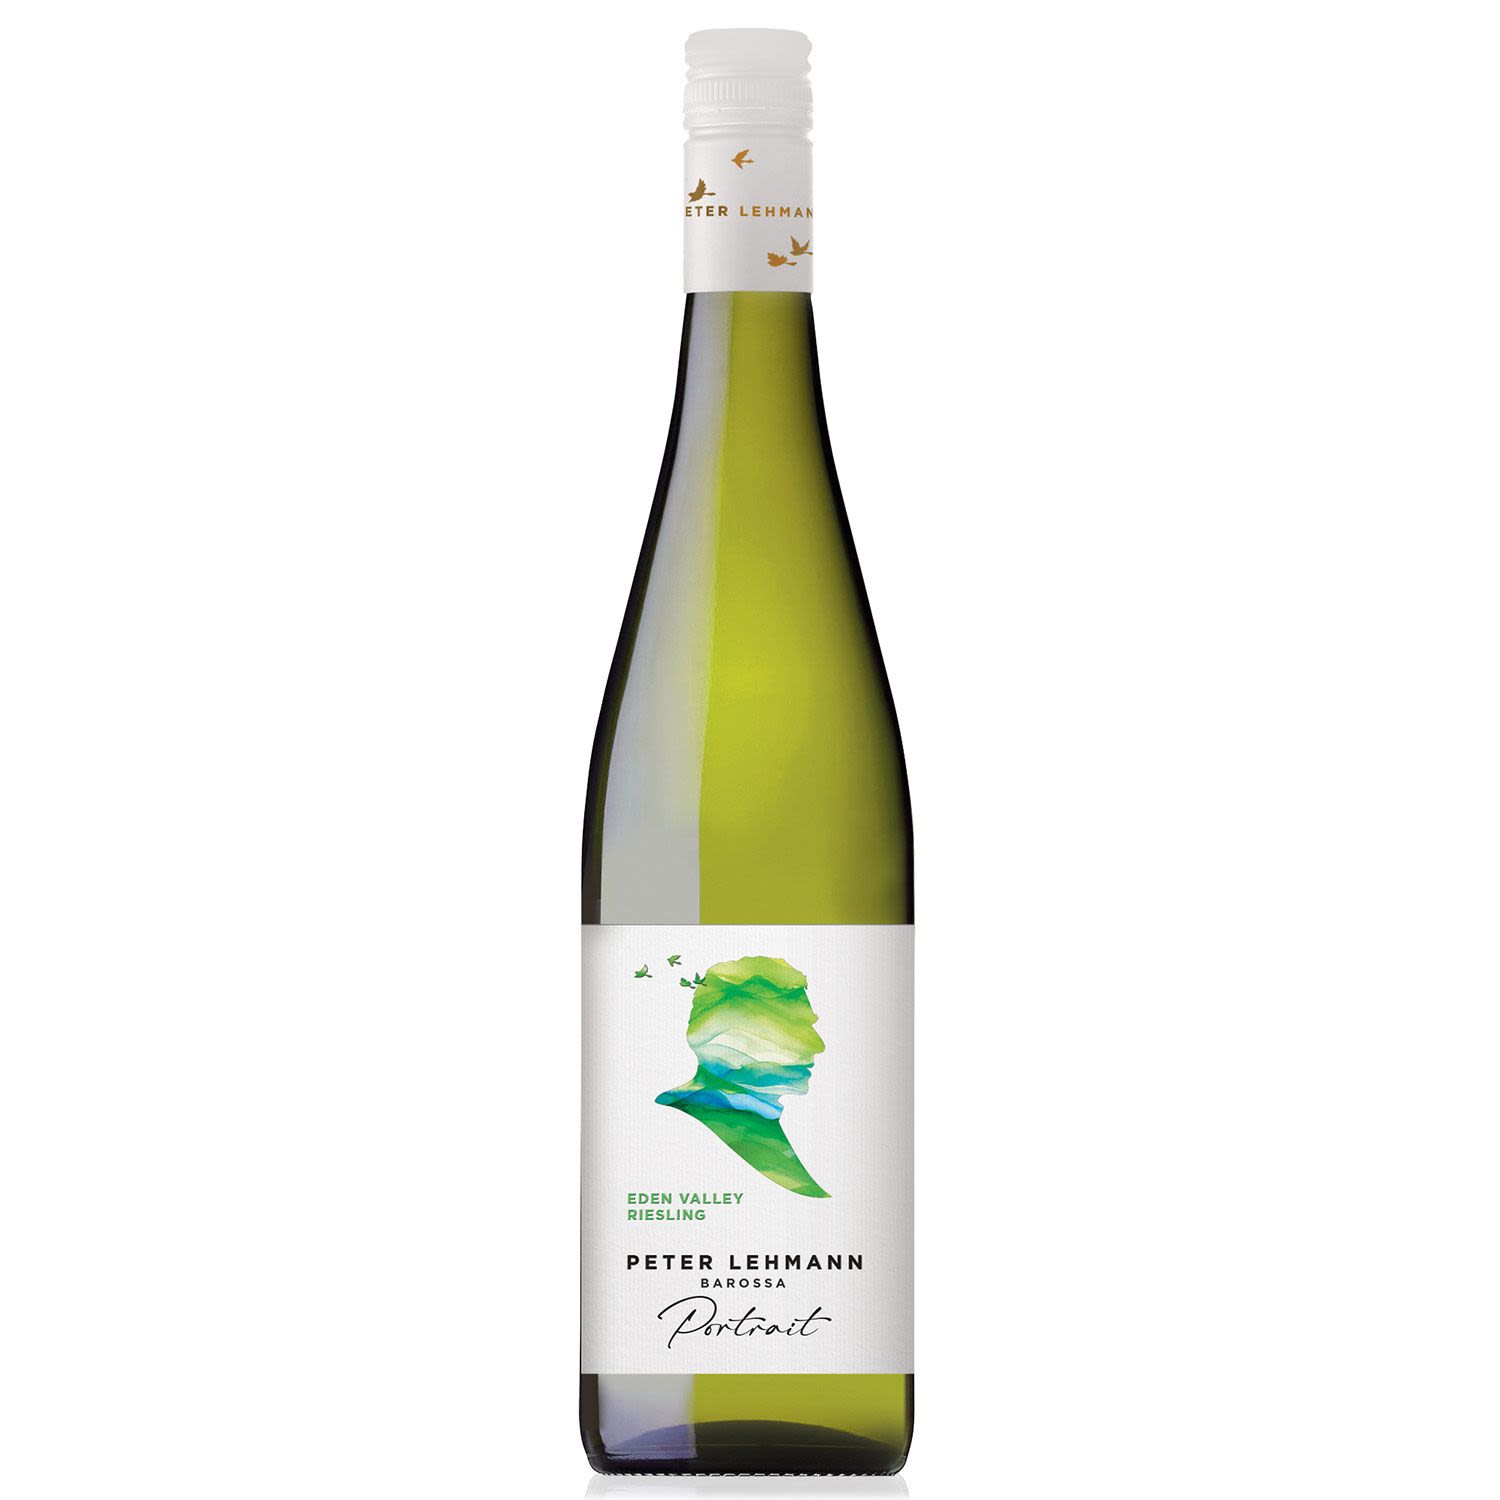 The delicate green/gold colour of the wine leads to enticing aromas of freshly picked green apples and lime. The wine shows vibrant lime characters with a crisp, dry finish. Can be cellared for up to 10 years.<br /> <br />Alcohol Volume: 11.50%<br /><br />Pack Format: Bottle<br /><br />Standard Drinks: 6.8<br /><br />Pack Type: Bottle<br /><br />Country of Origin: Australia<br /><br />Region: Eden Valley<br /><br />Vintage: Vintages Vary<br />